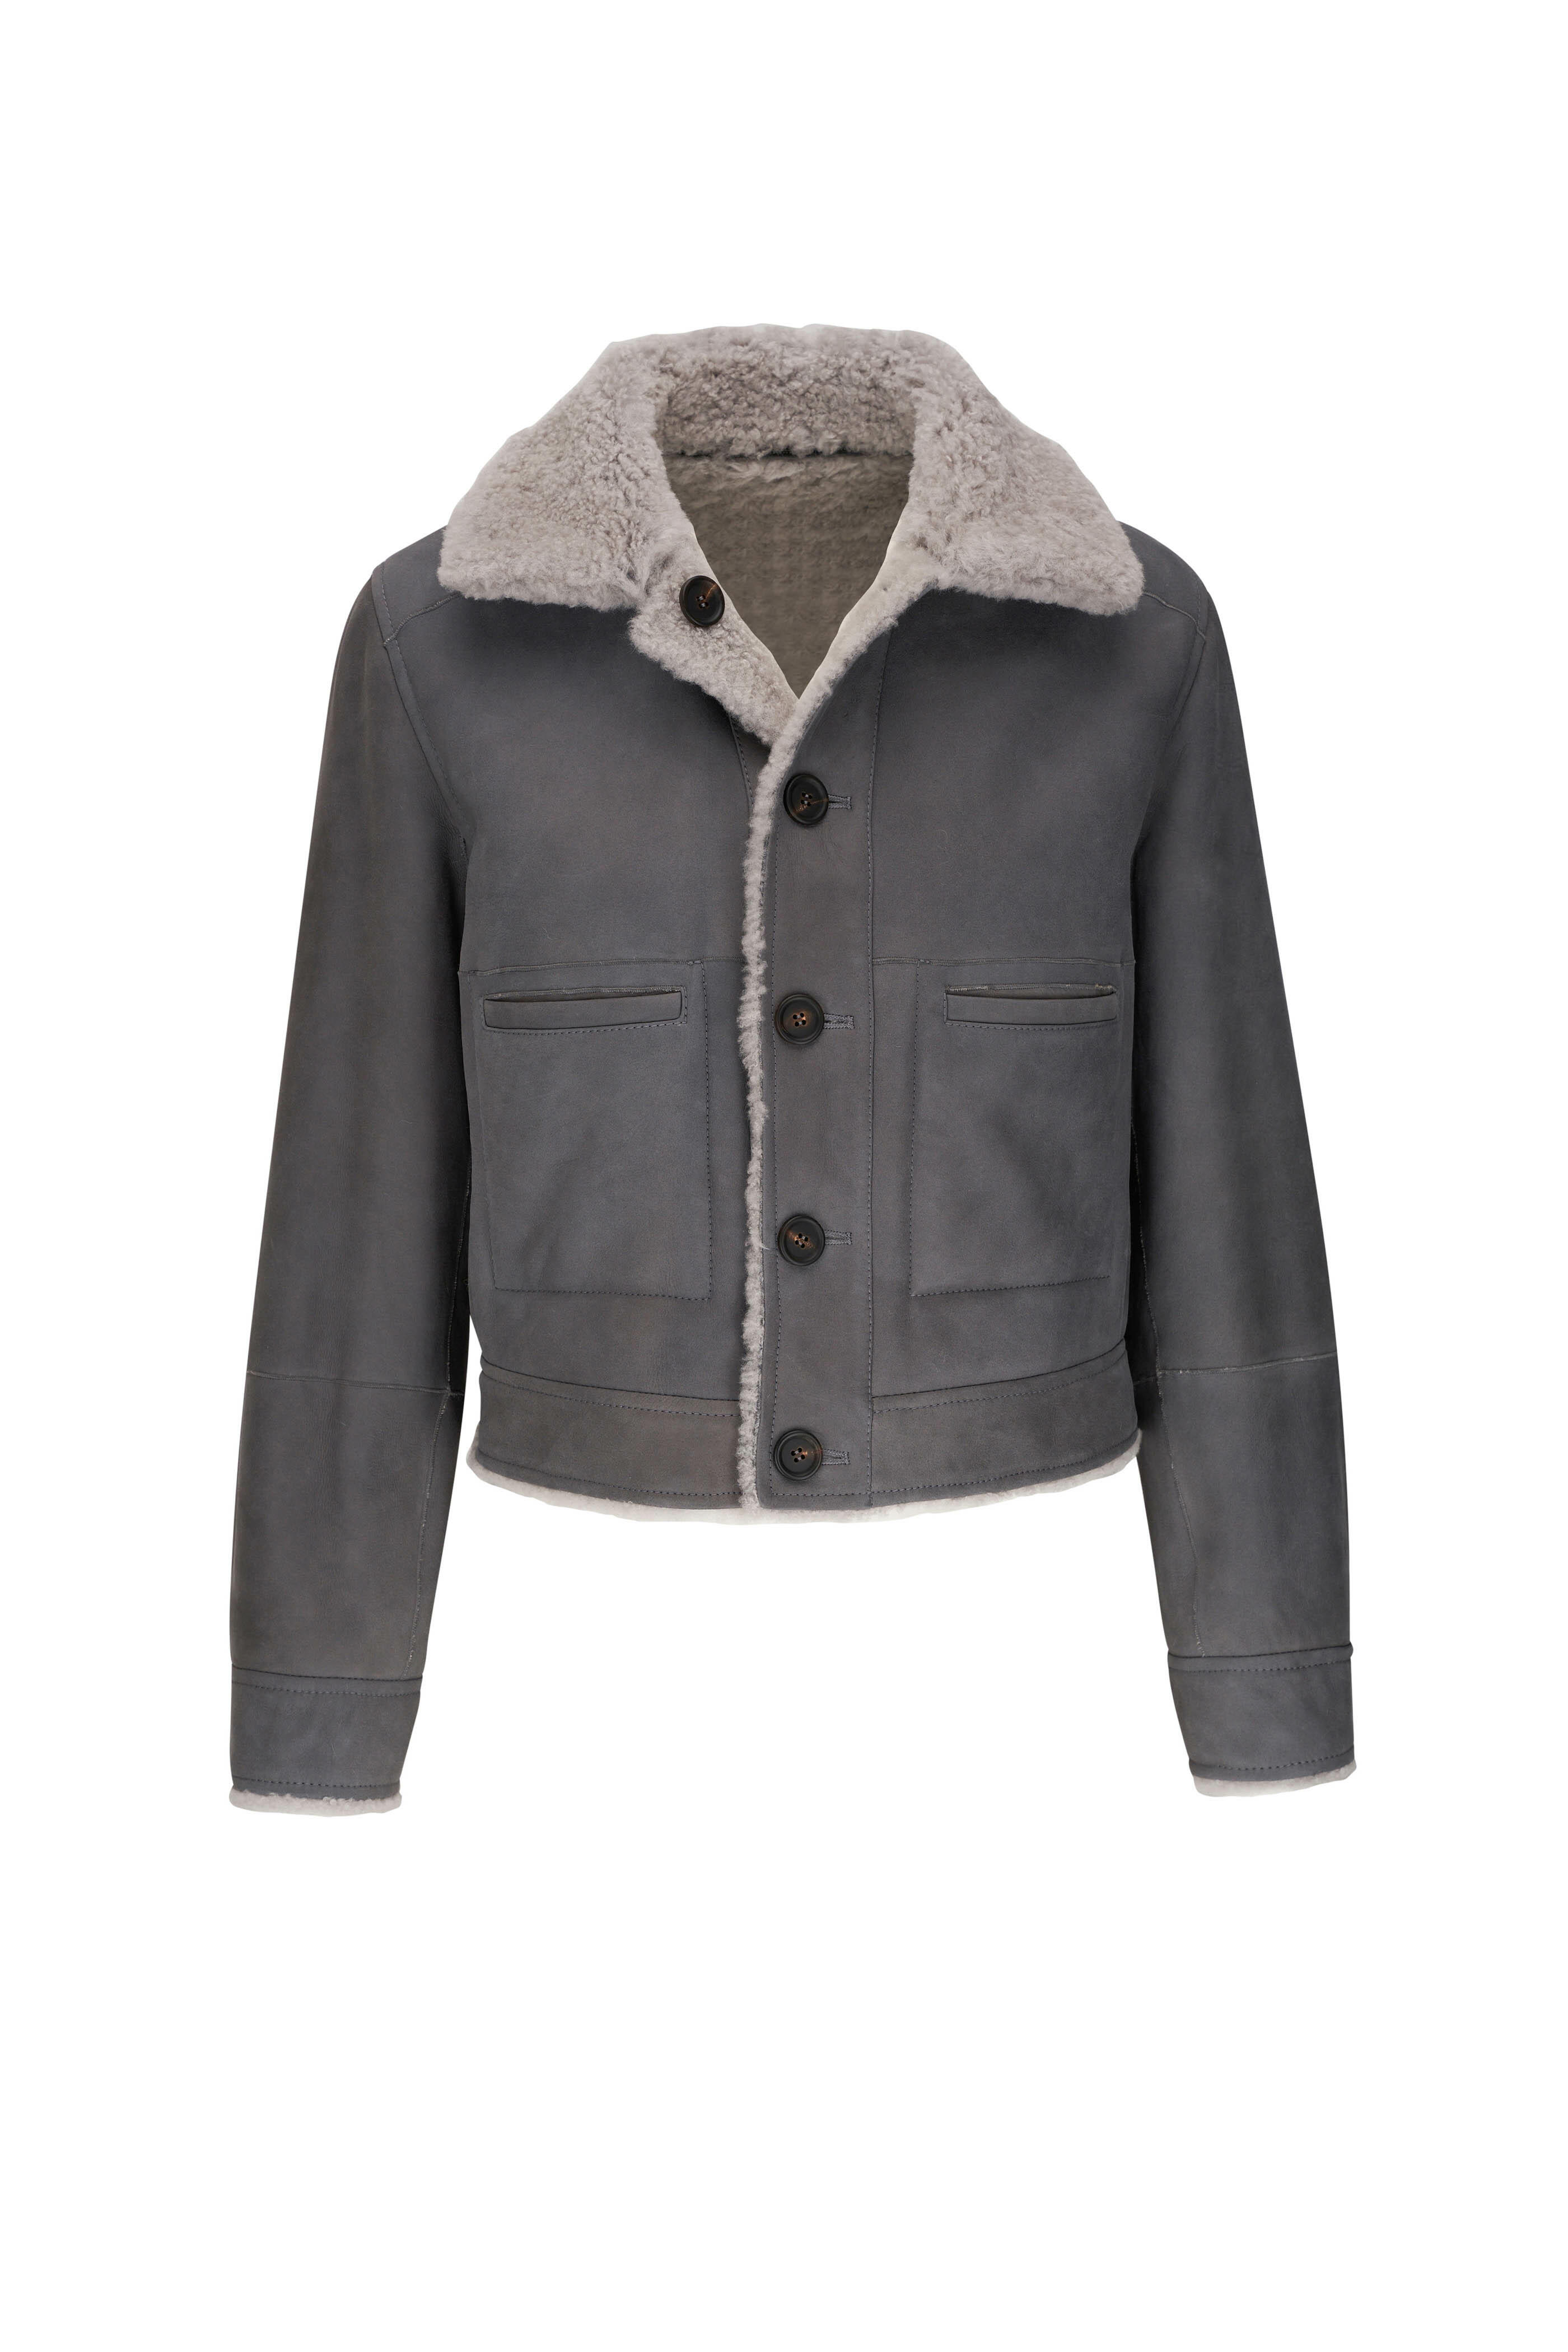 Brunello Cucinelli - Gray Shearling & Leather Reversible Jacket